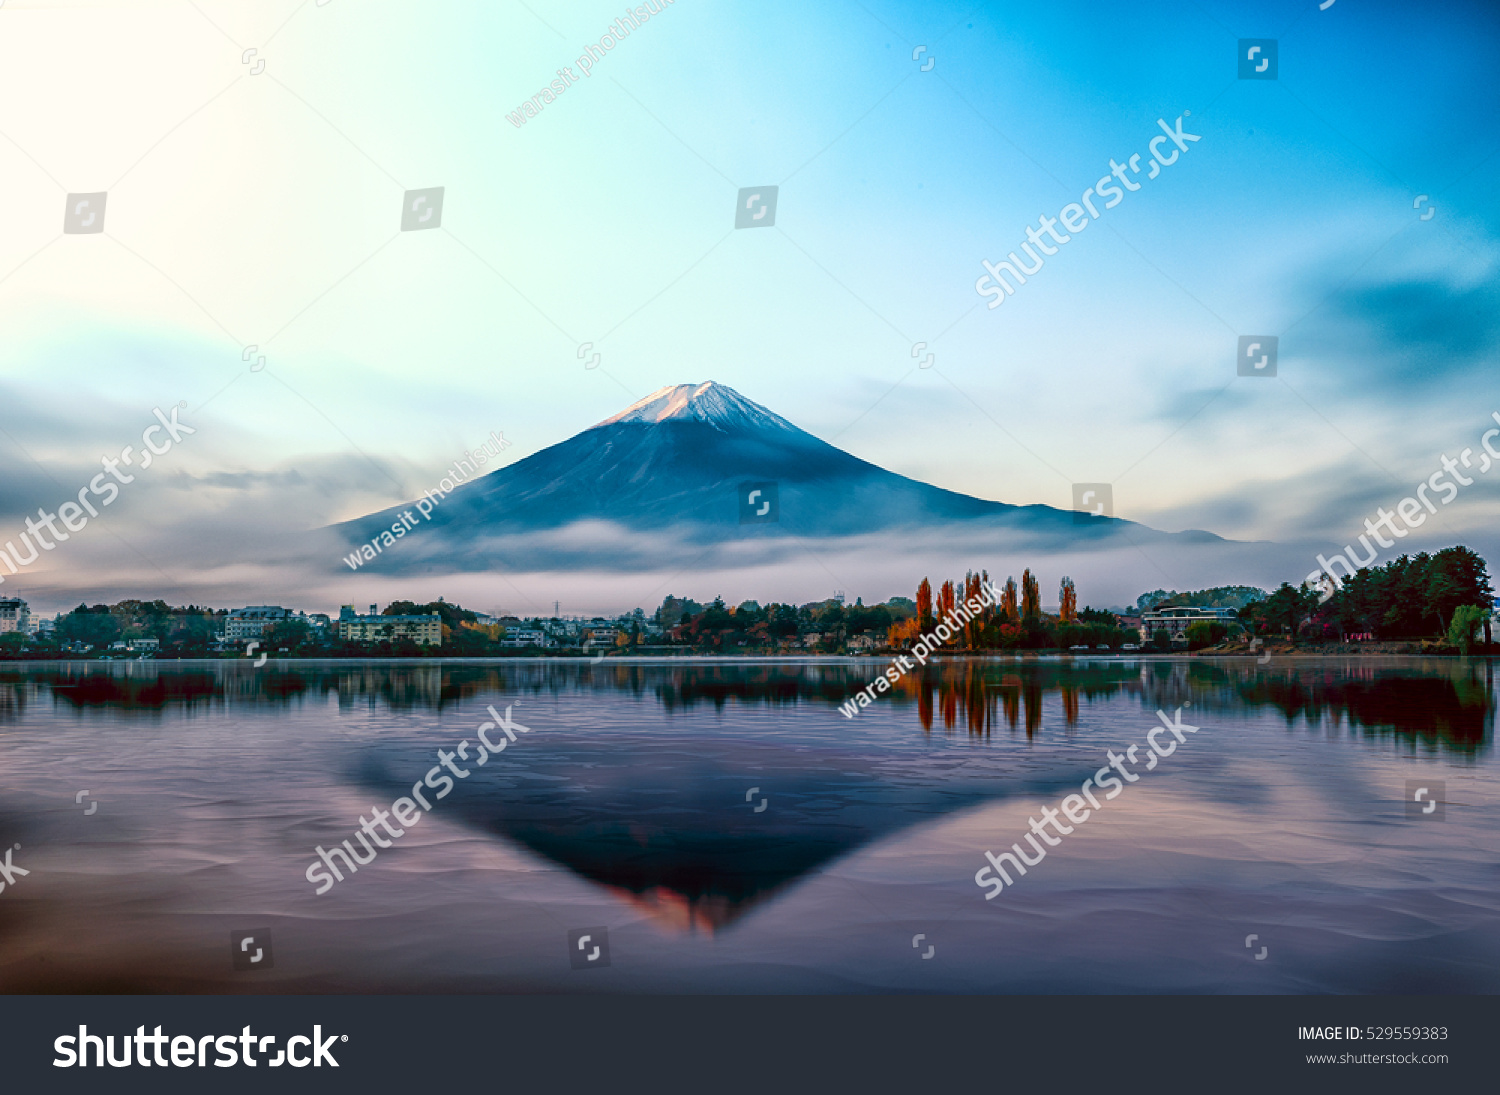 Mt Fuji in the early morning with reflection on the lake kawaguchiko #529559383